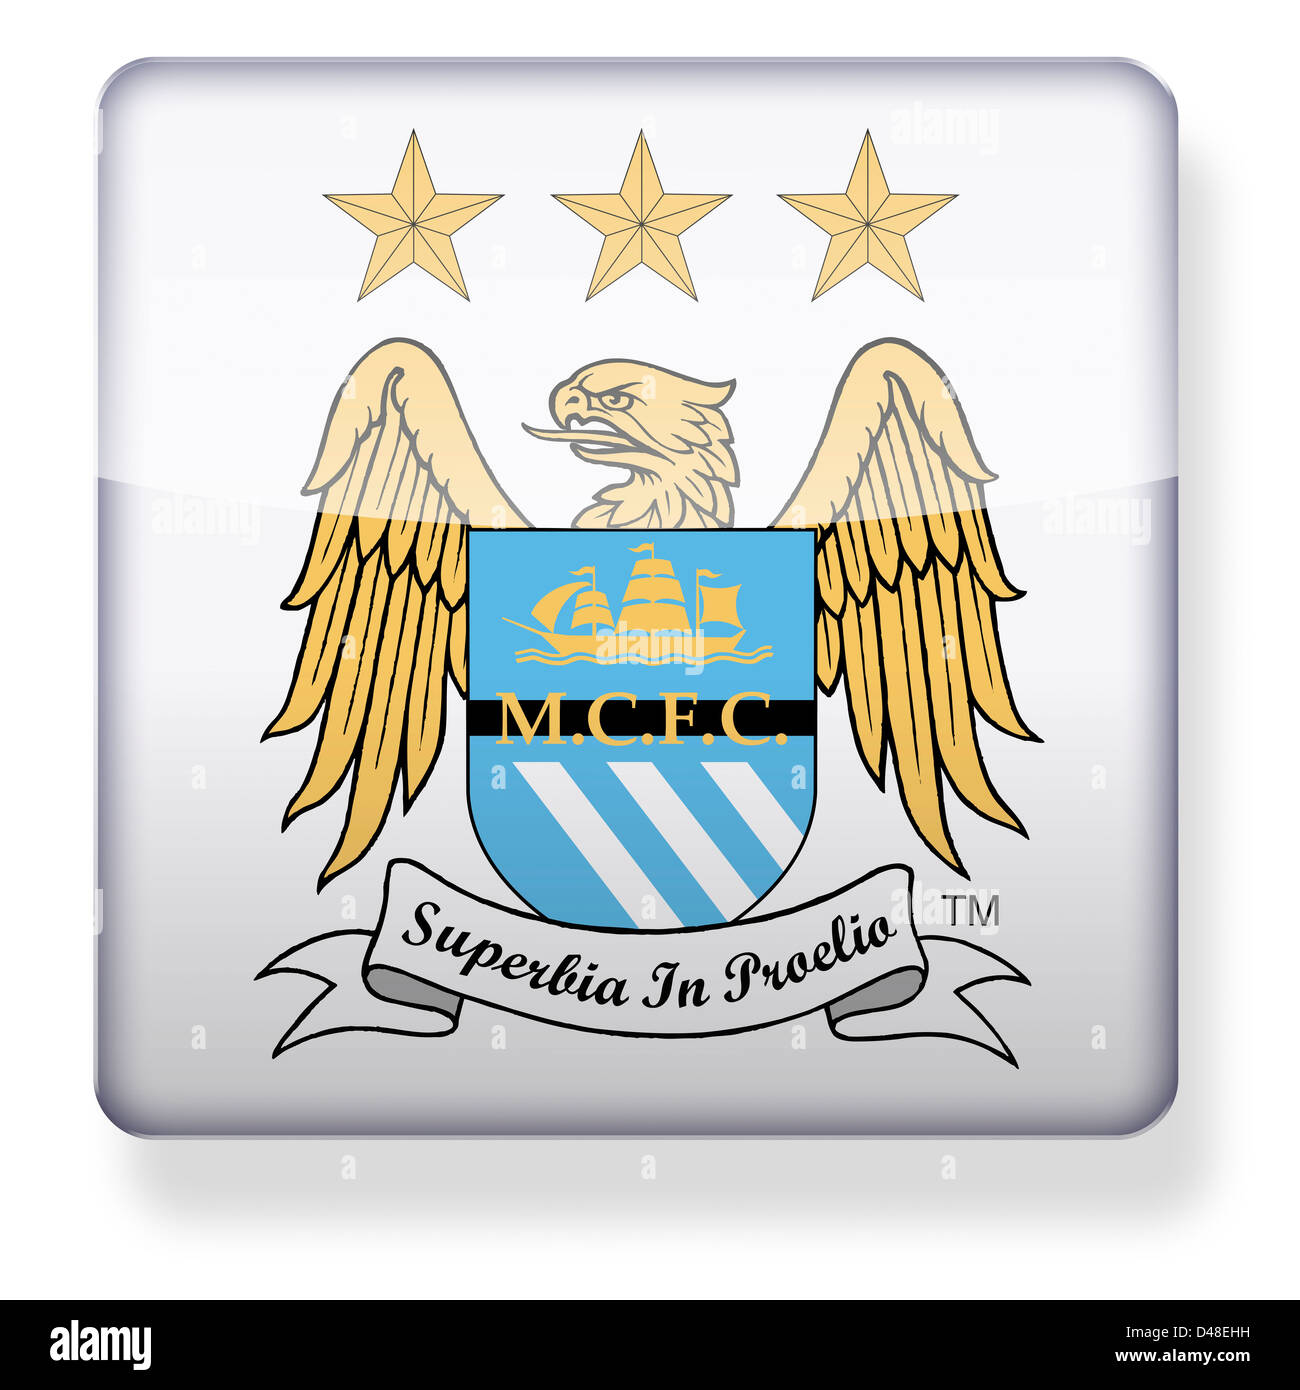 Manchester City football club logo as an app icon. Clipping path included. Stock Photo